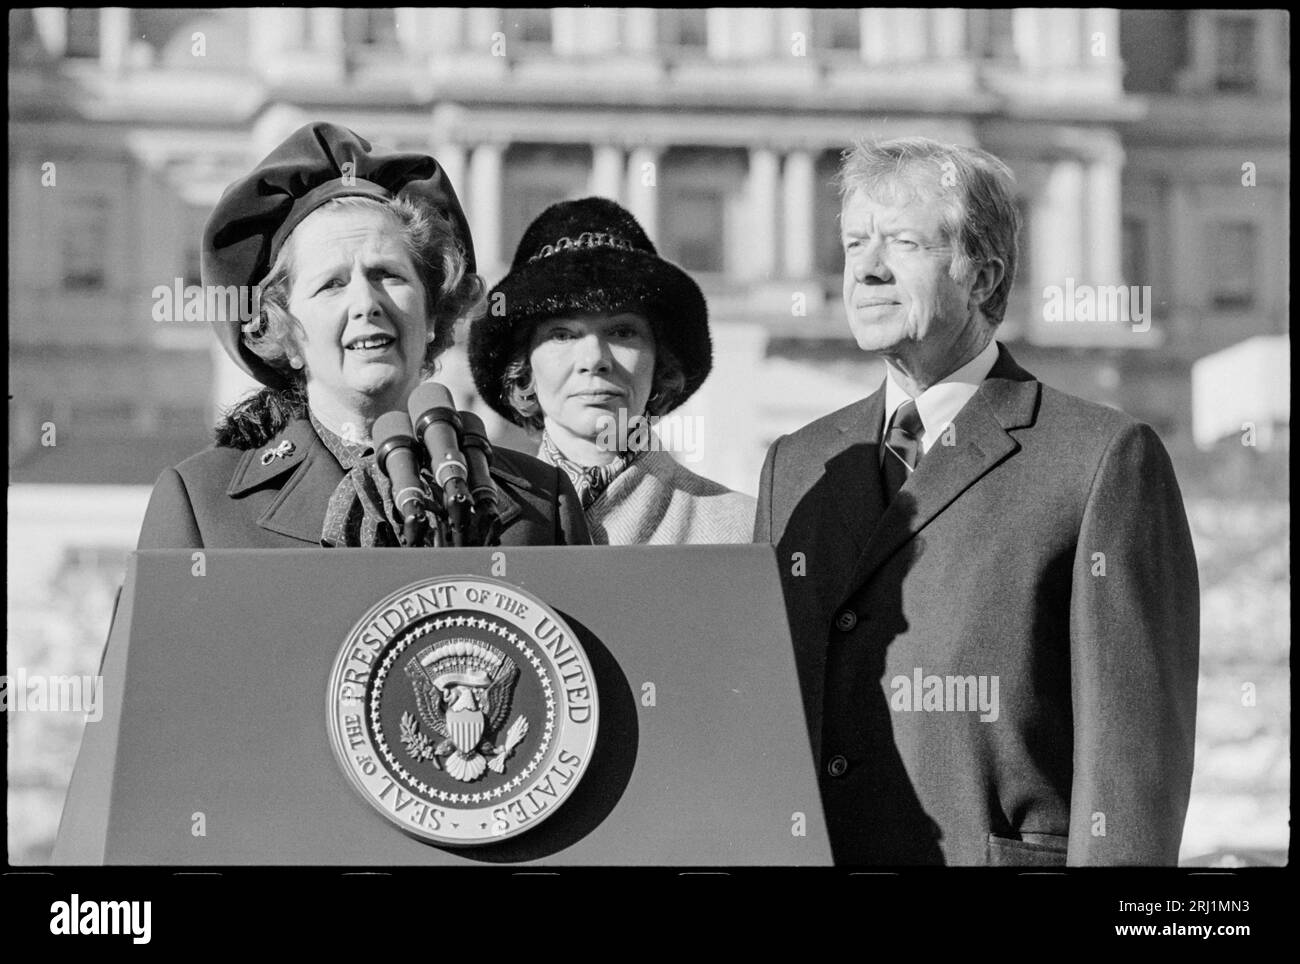 Prime Minister of Great Britain, Margaret Thatcher, speaking at a lectern, next to President of US Jimmy Carter and First Lady Rosalynn Carter.  In Washington, D.C.  17 December 1979. Stock Photo